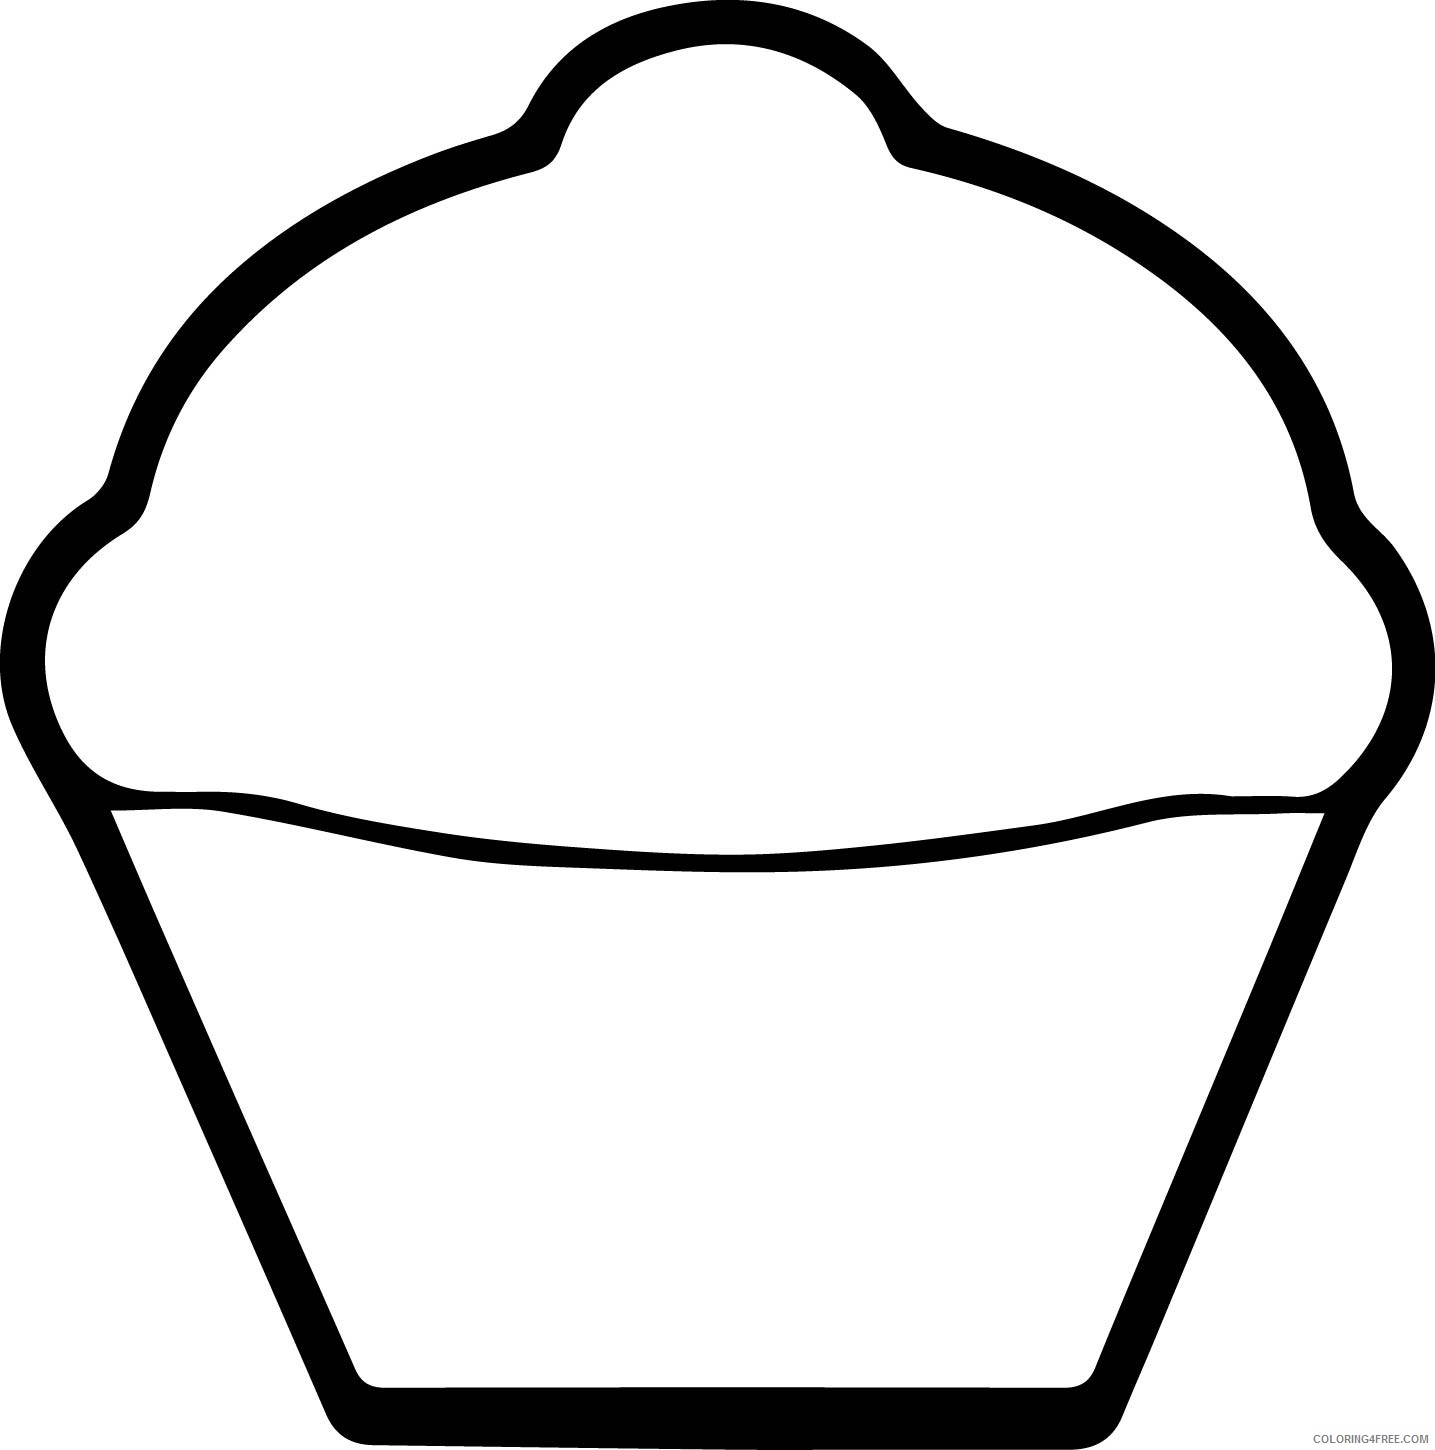 Cupcake Coloring Pages For Kids : Cute Cupcake Coloring Pages